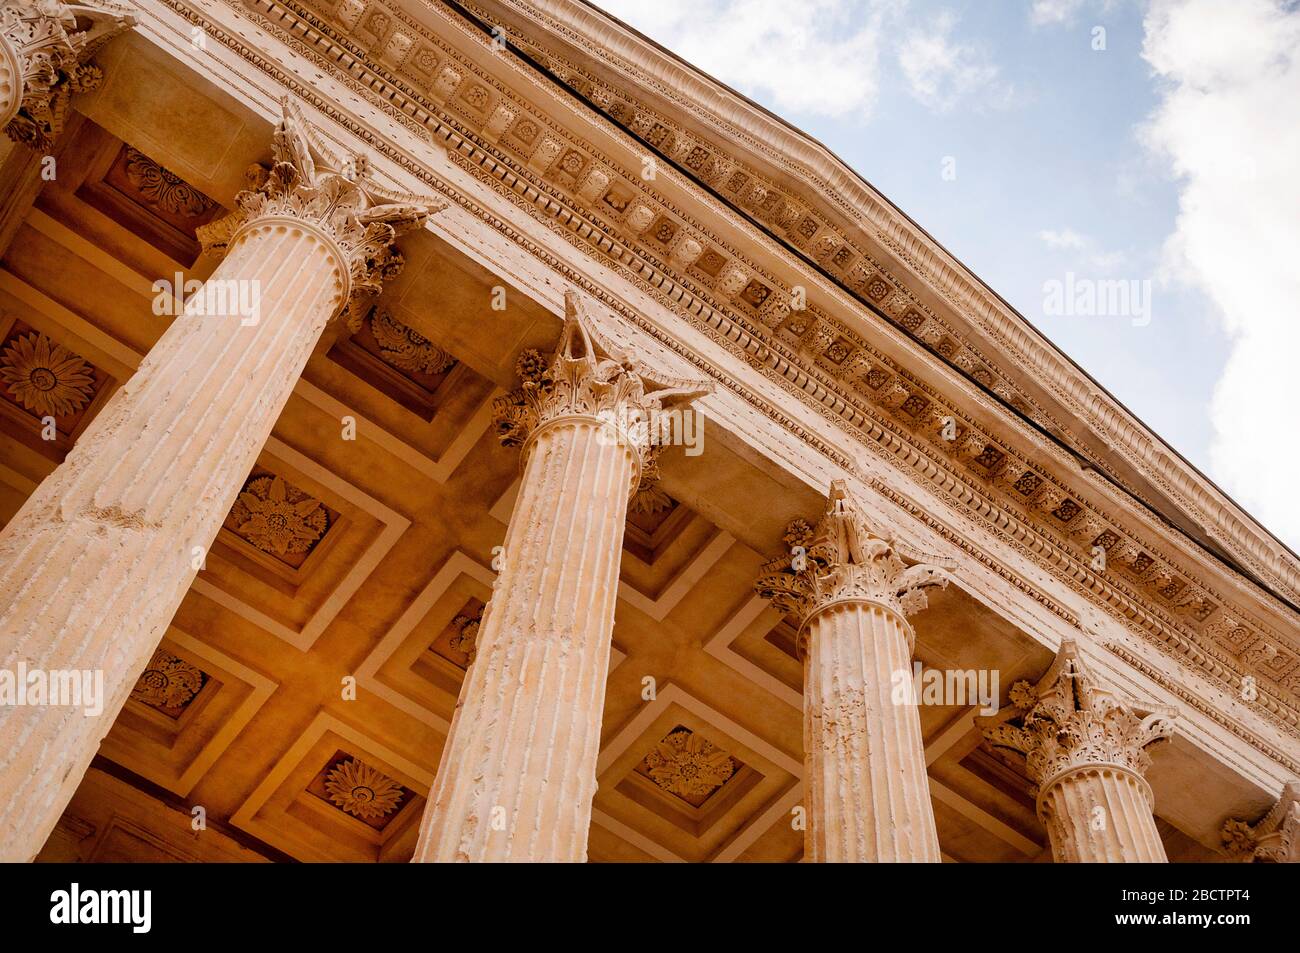 The Maison-Carrée in Nîmes France is an outstanding Roman temple and monument built in the Corinthain order of classical architecture. Stock Photo